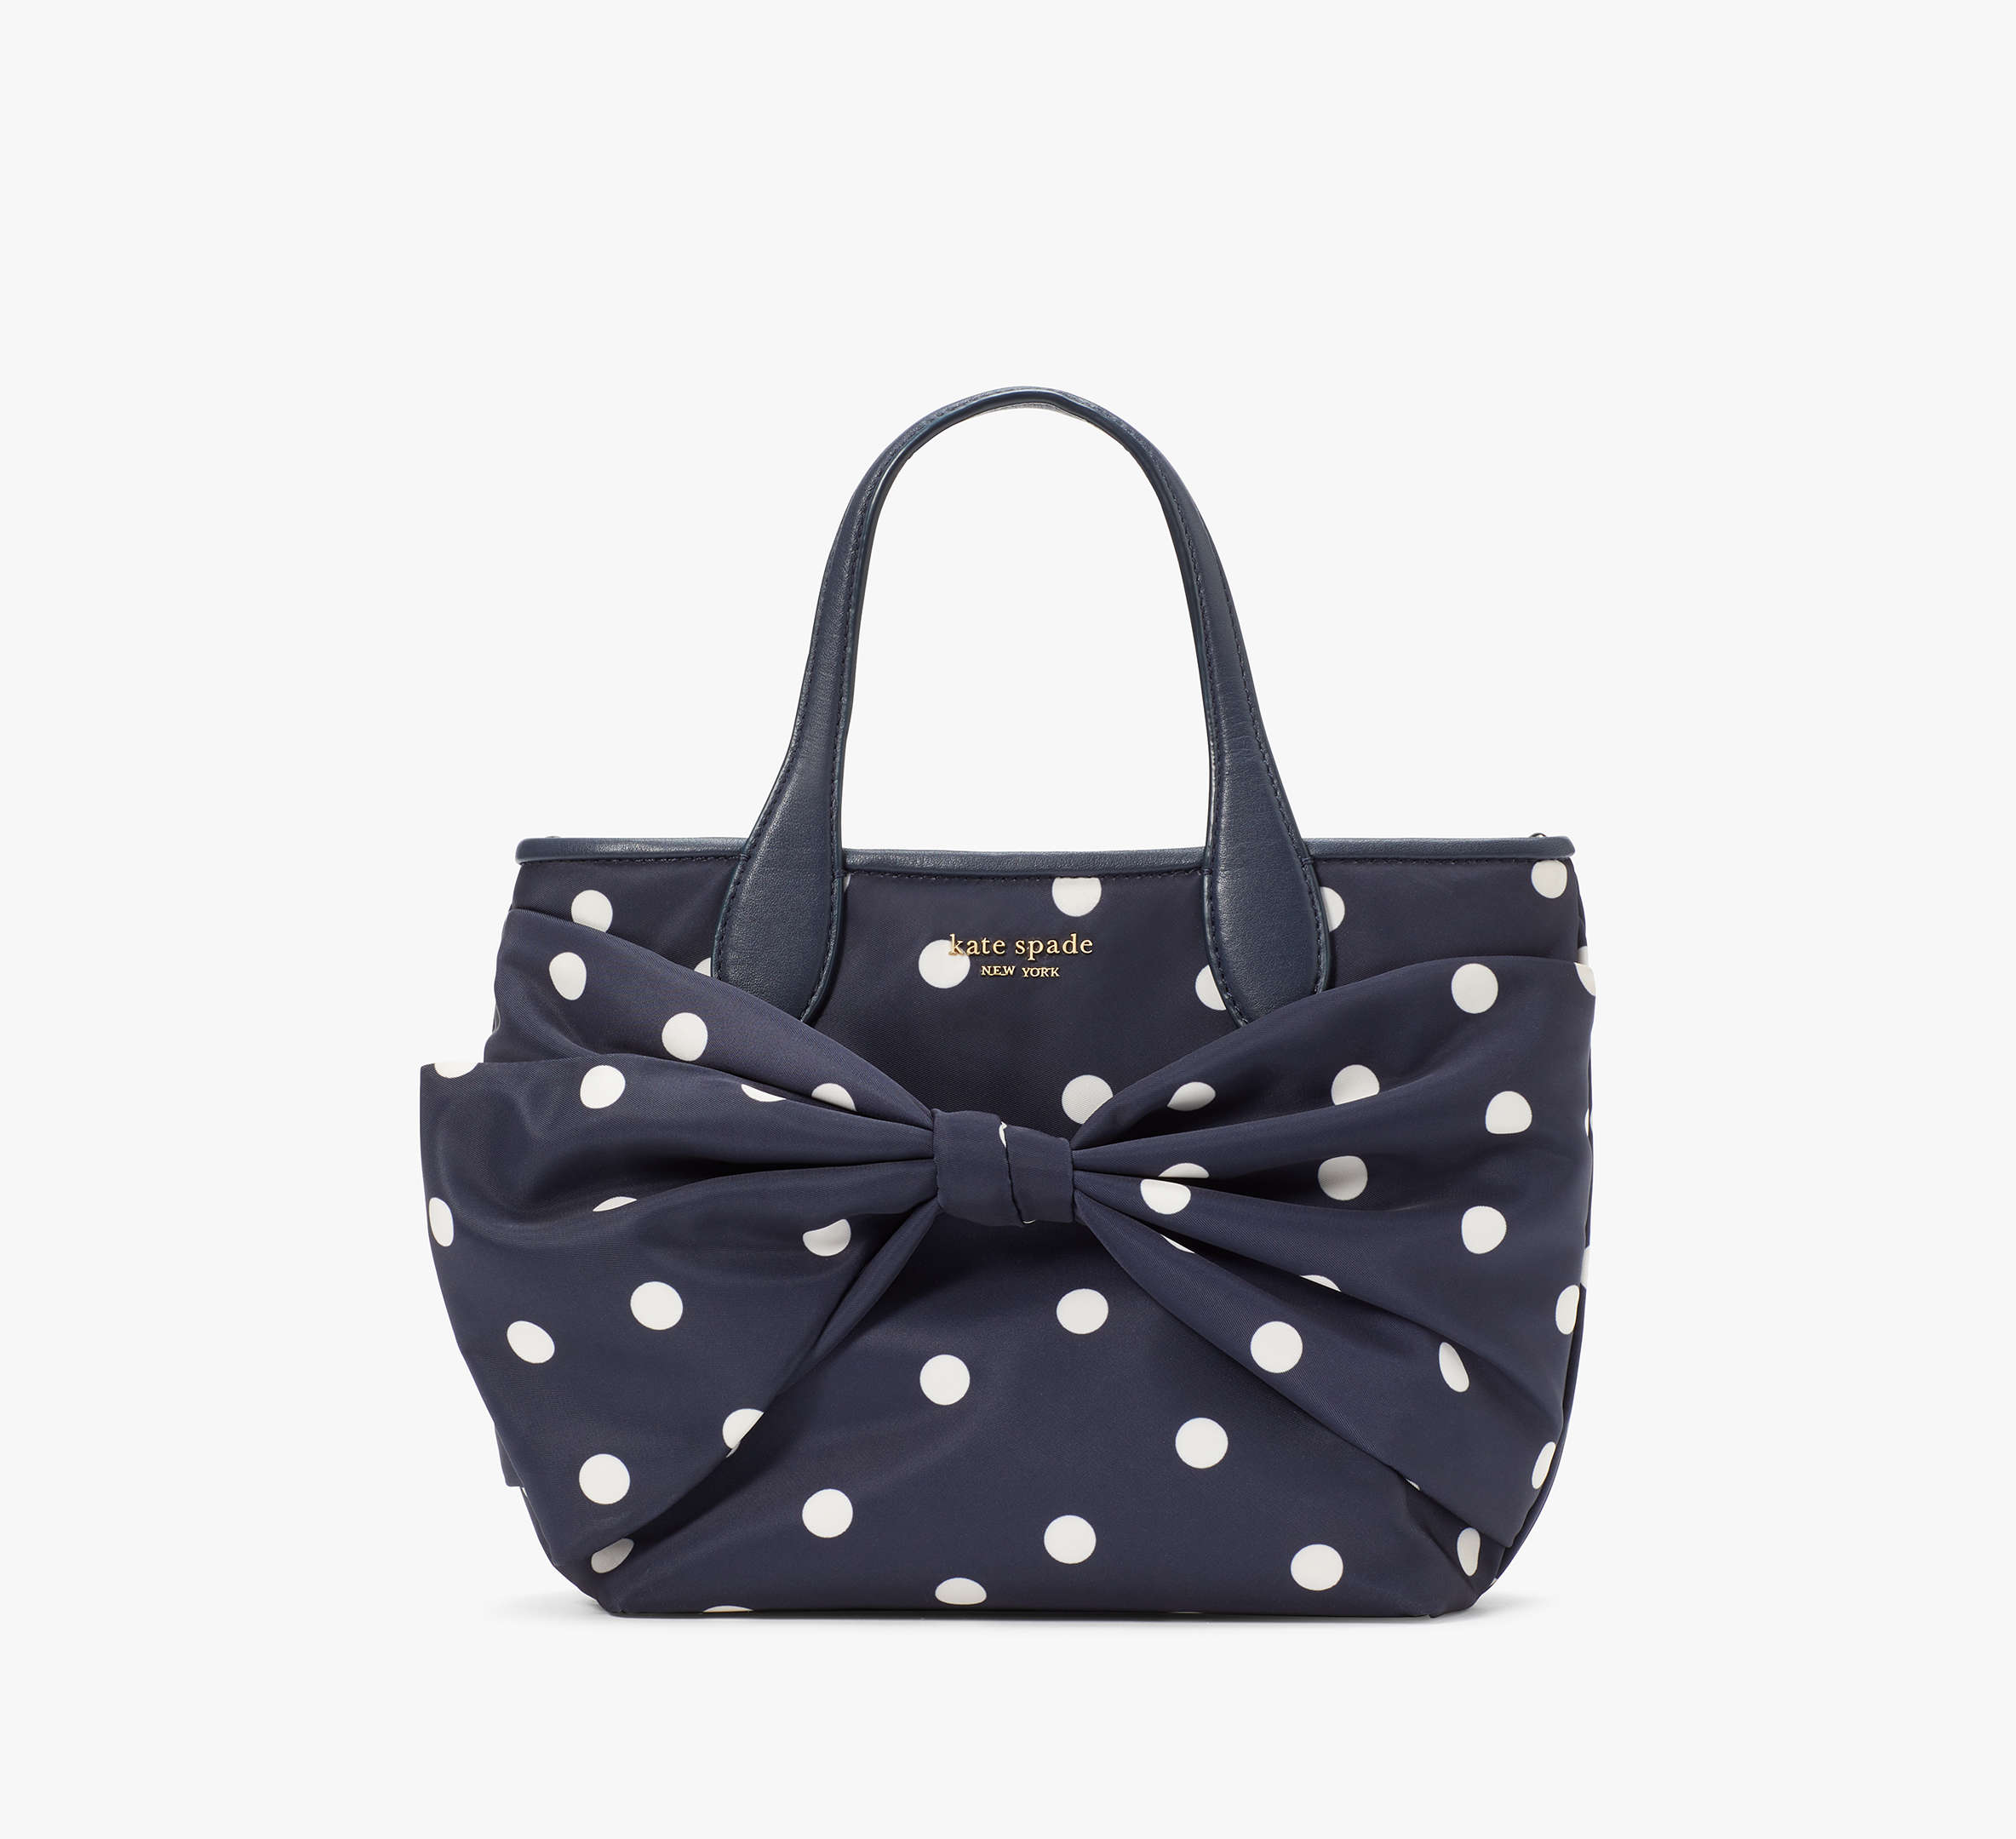 Kate Spade On Purpose Polka Dot Bow Tote In Rich Navy